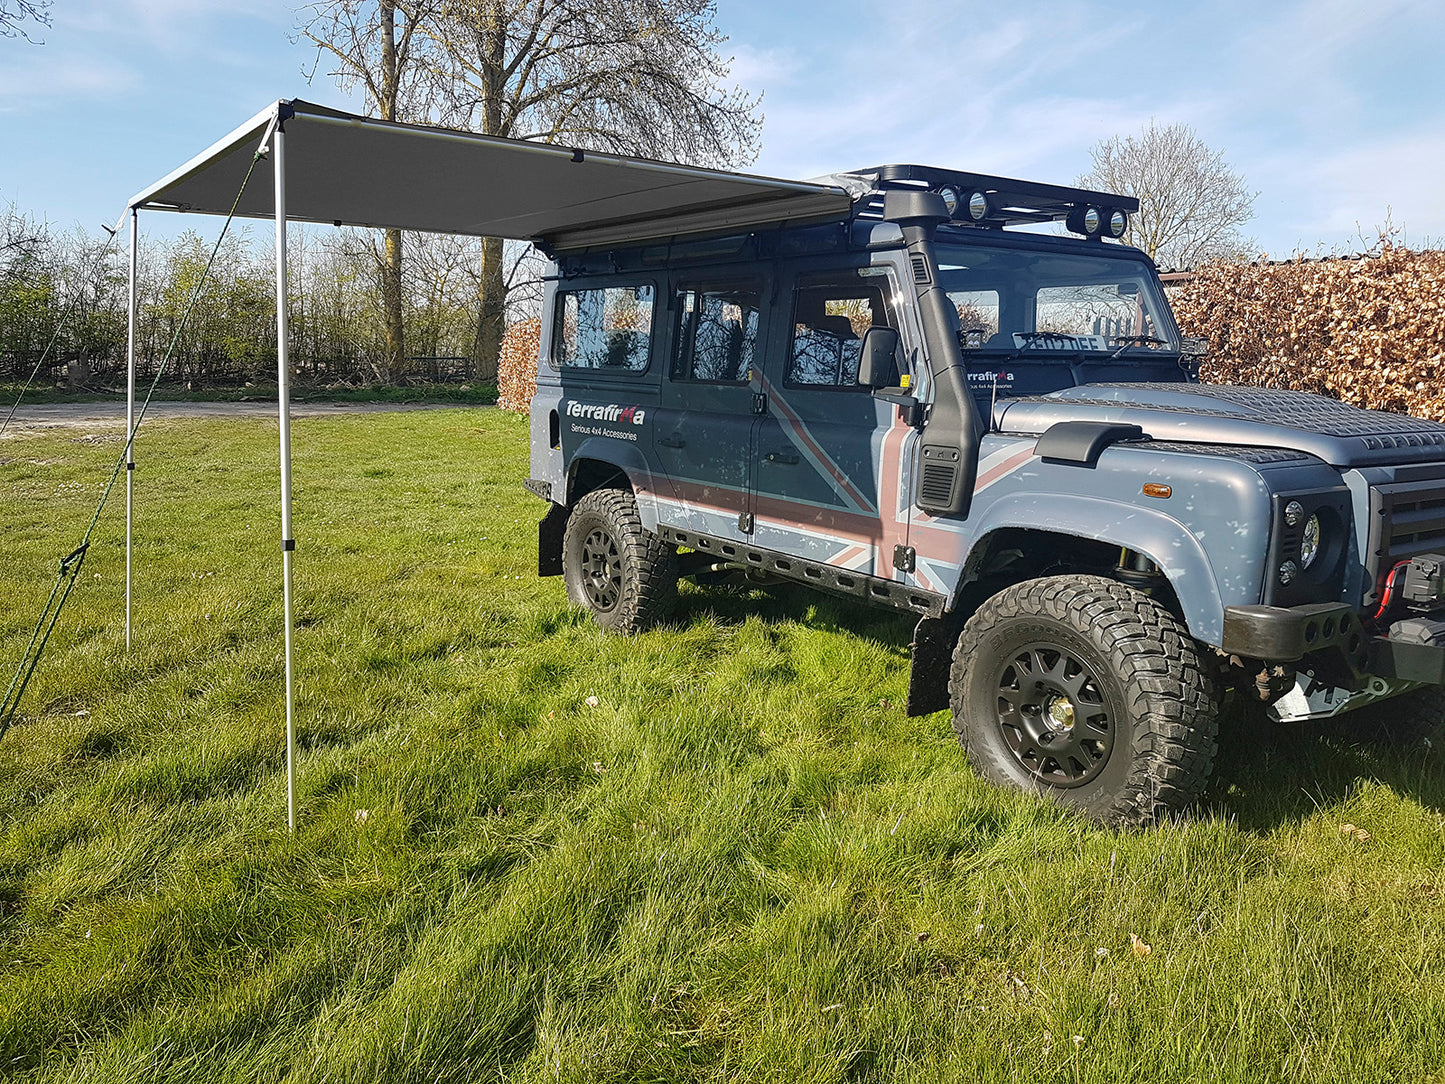 TF1701 2.0M EXPEDITION AWNING - UNIVERSAL